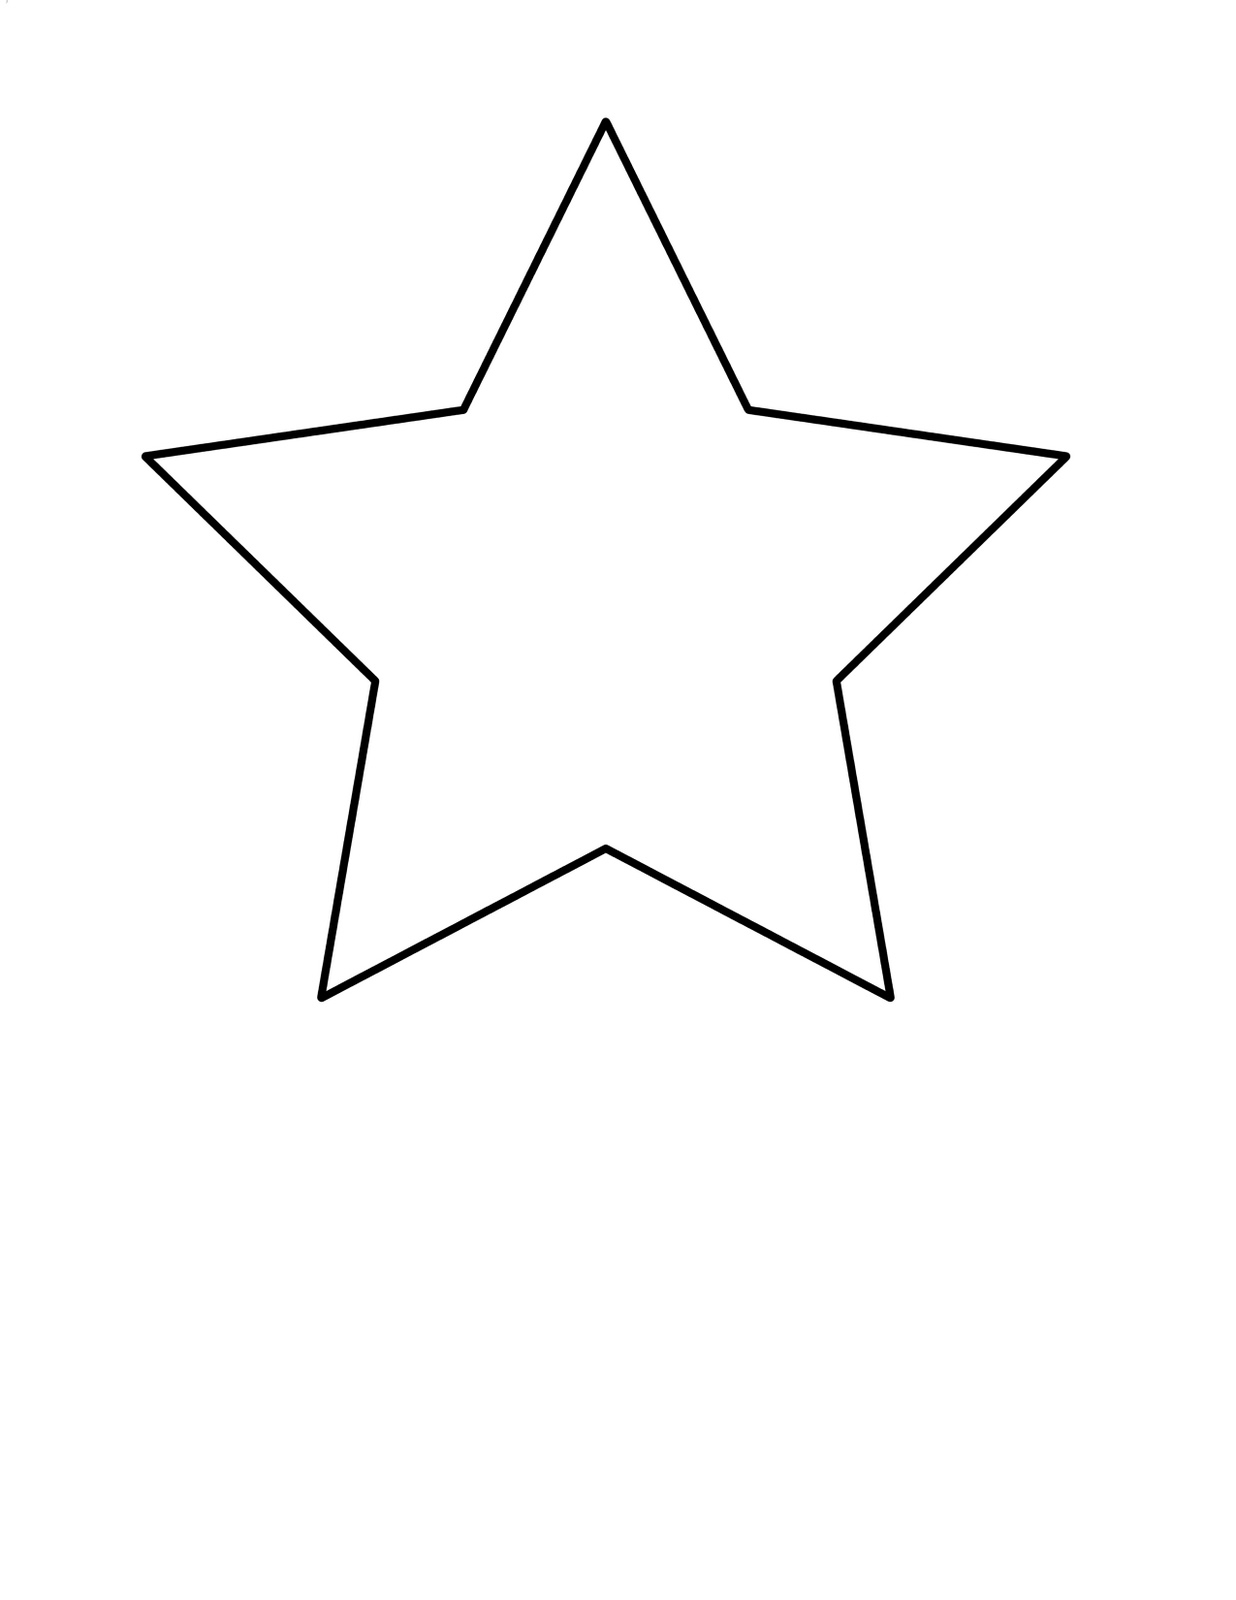 Pin Star Simple Shapes Easy Coloring Pages For Toddlers on ...